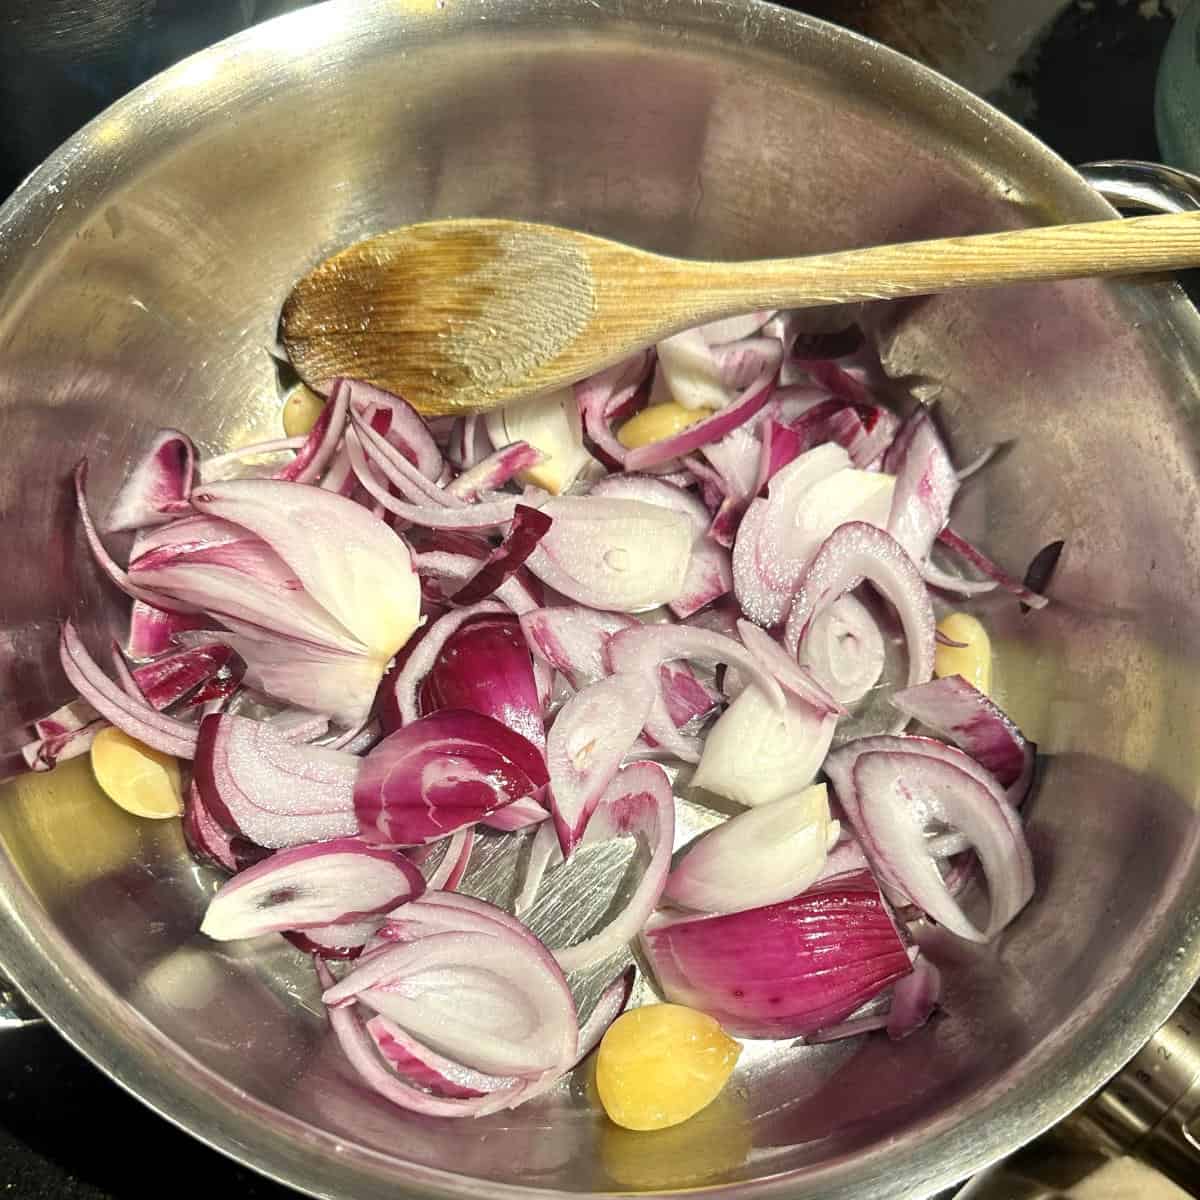 Onions and garlic in oil.